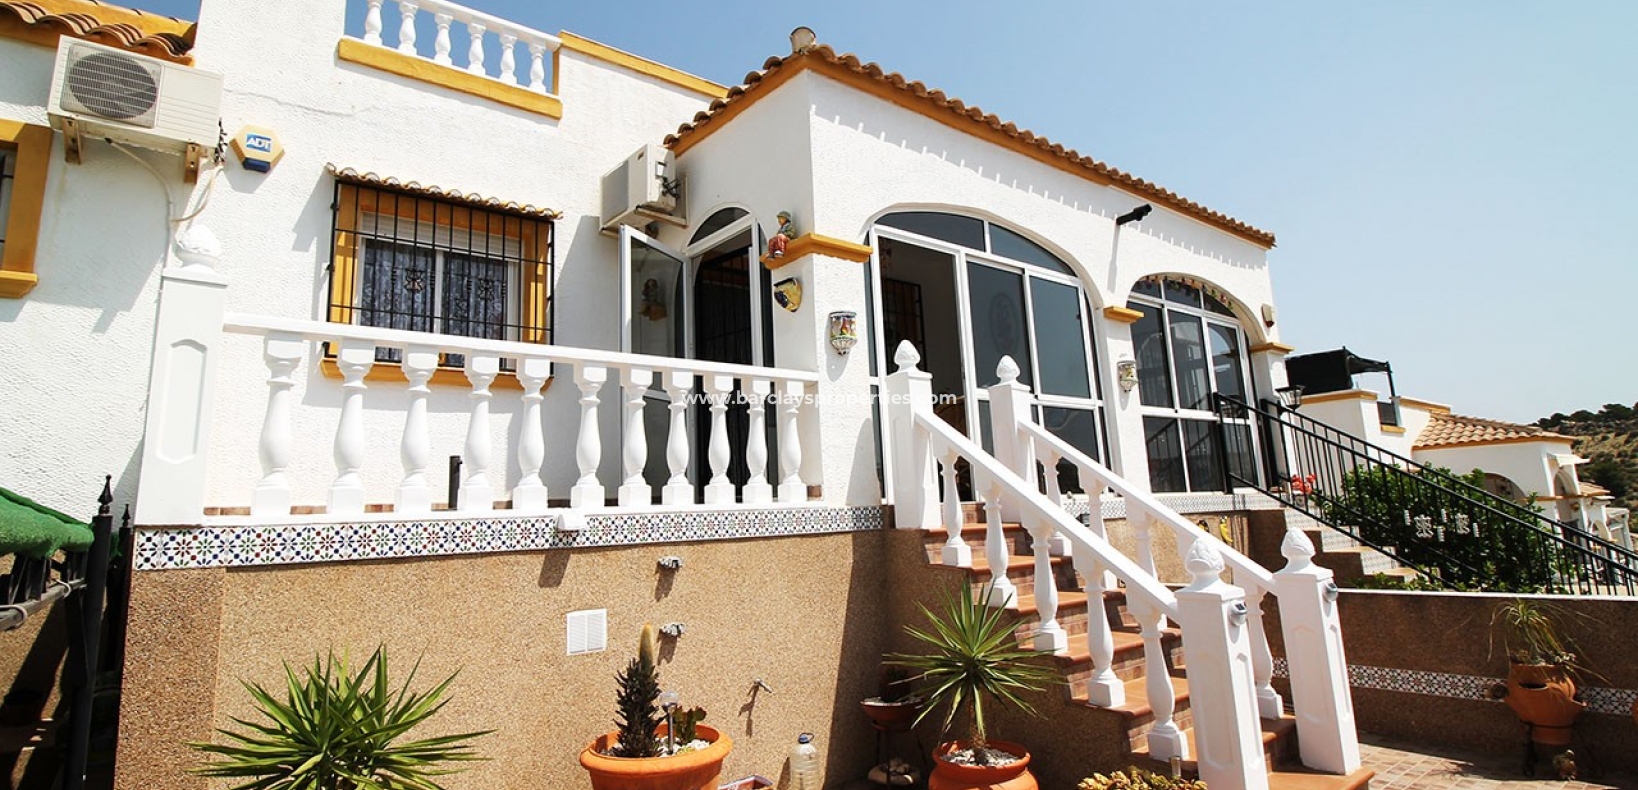 Property - South Facing Property for Sale in La Marina Spain